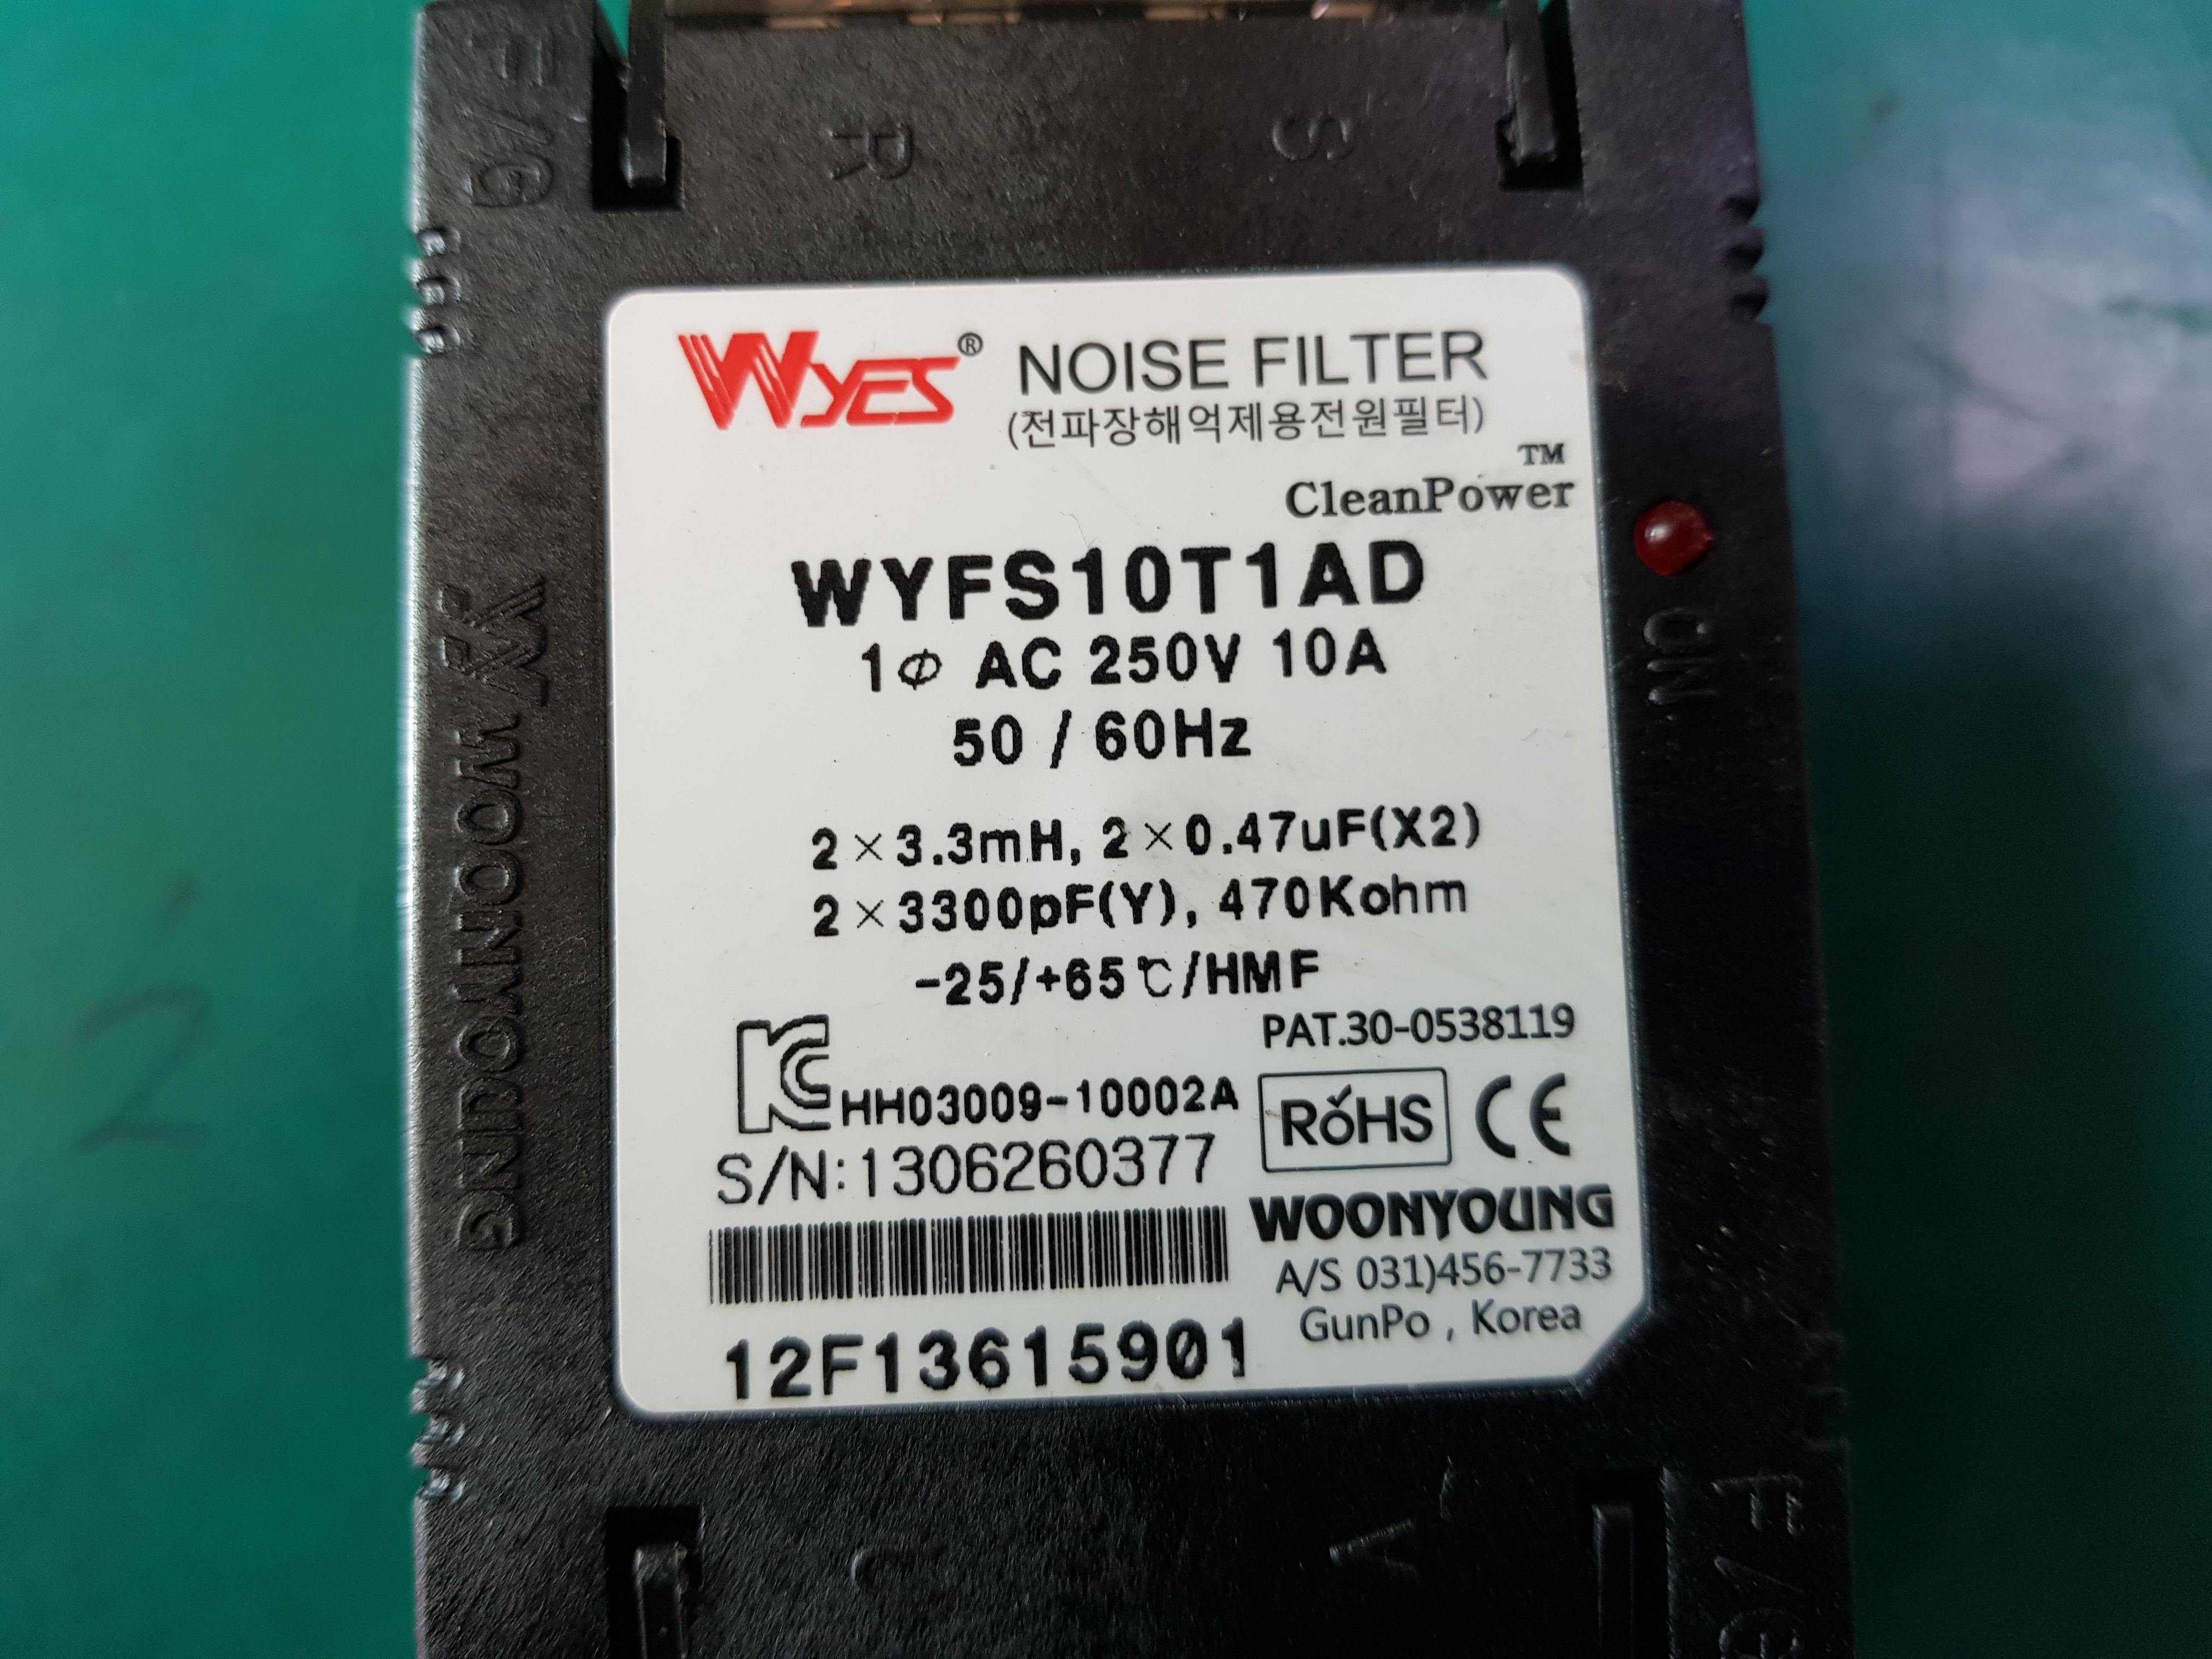 NOISE FILTER WYFS10T1AD(중고)